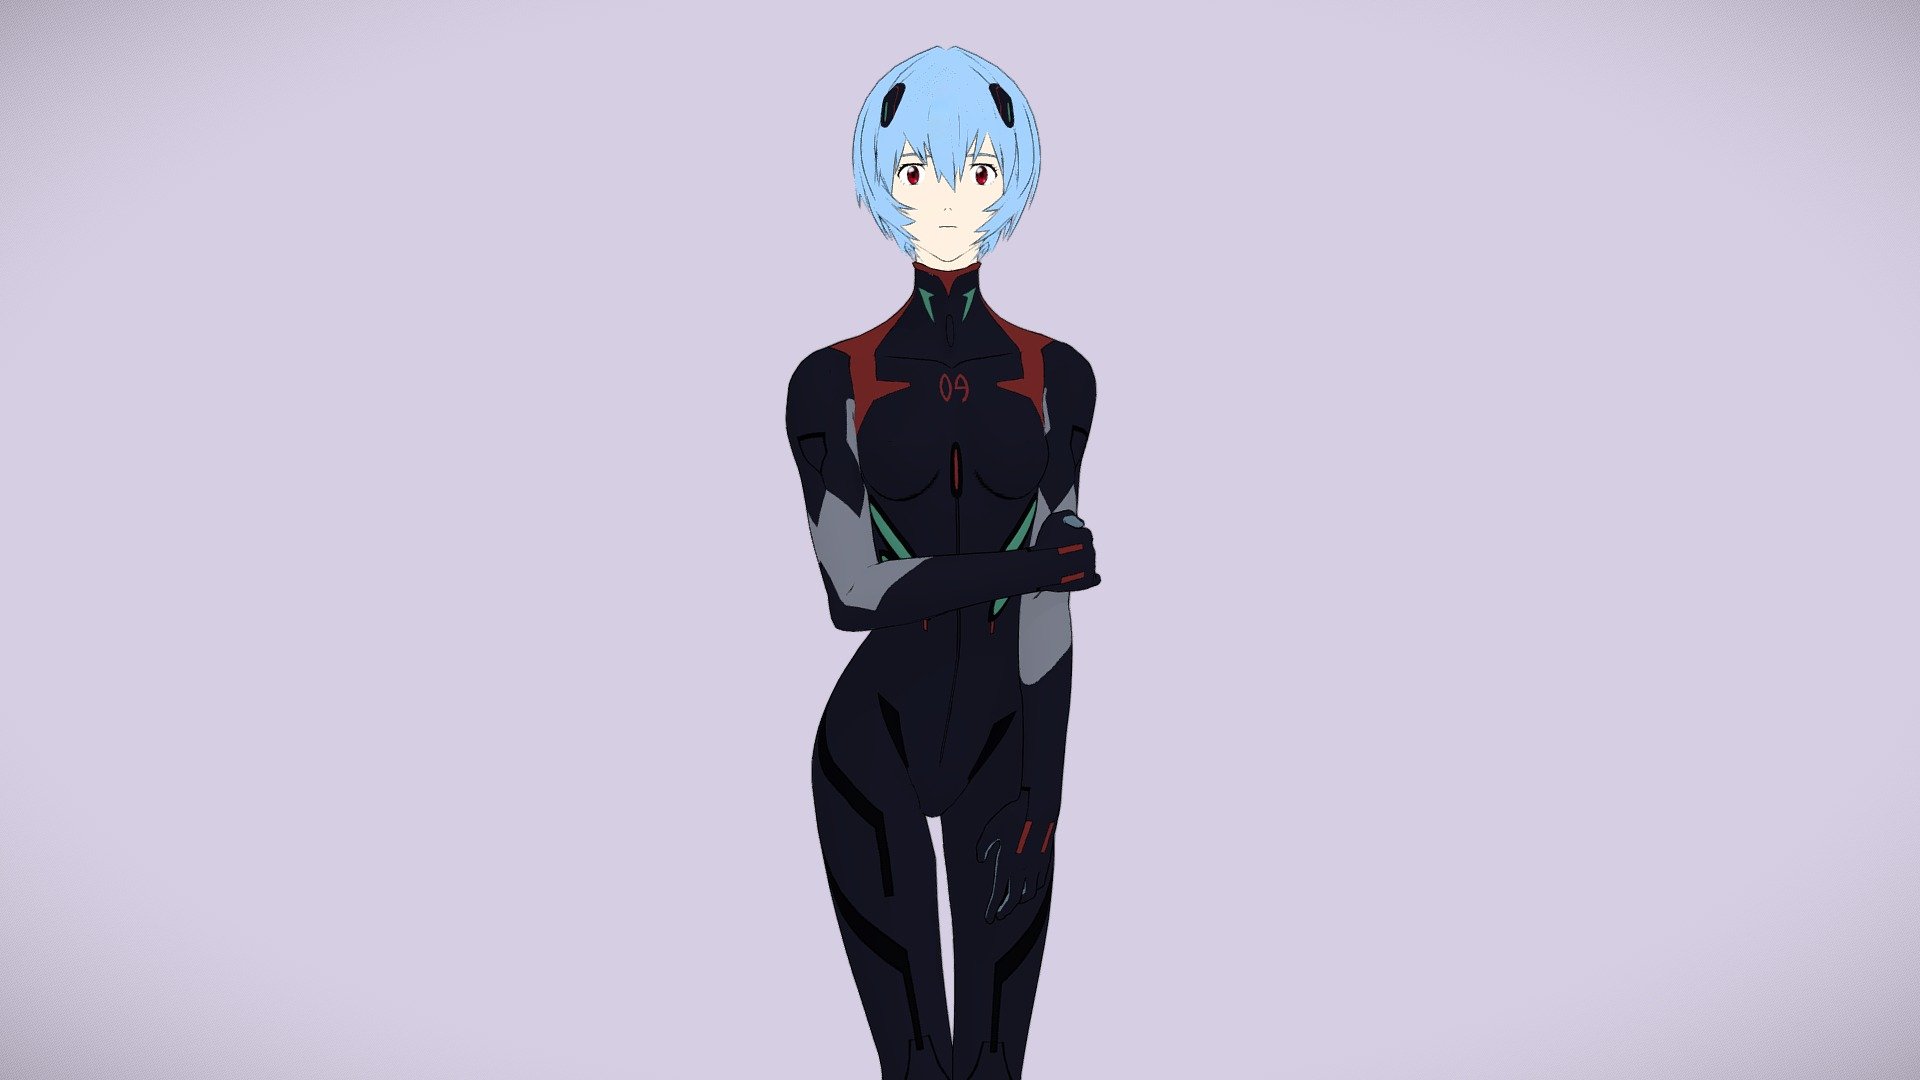 Ayanami Rei in the Plugsuit of &lsquo;Rebuild of Evangelion 3.x' (Highpoly Version)

I am planning on doing a few more variants of her.

Her suit uses a 1k texture 3d model